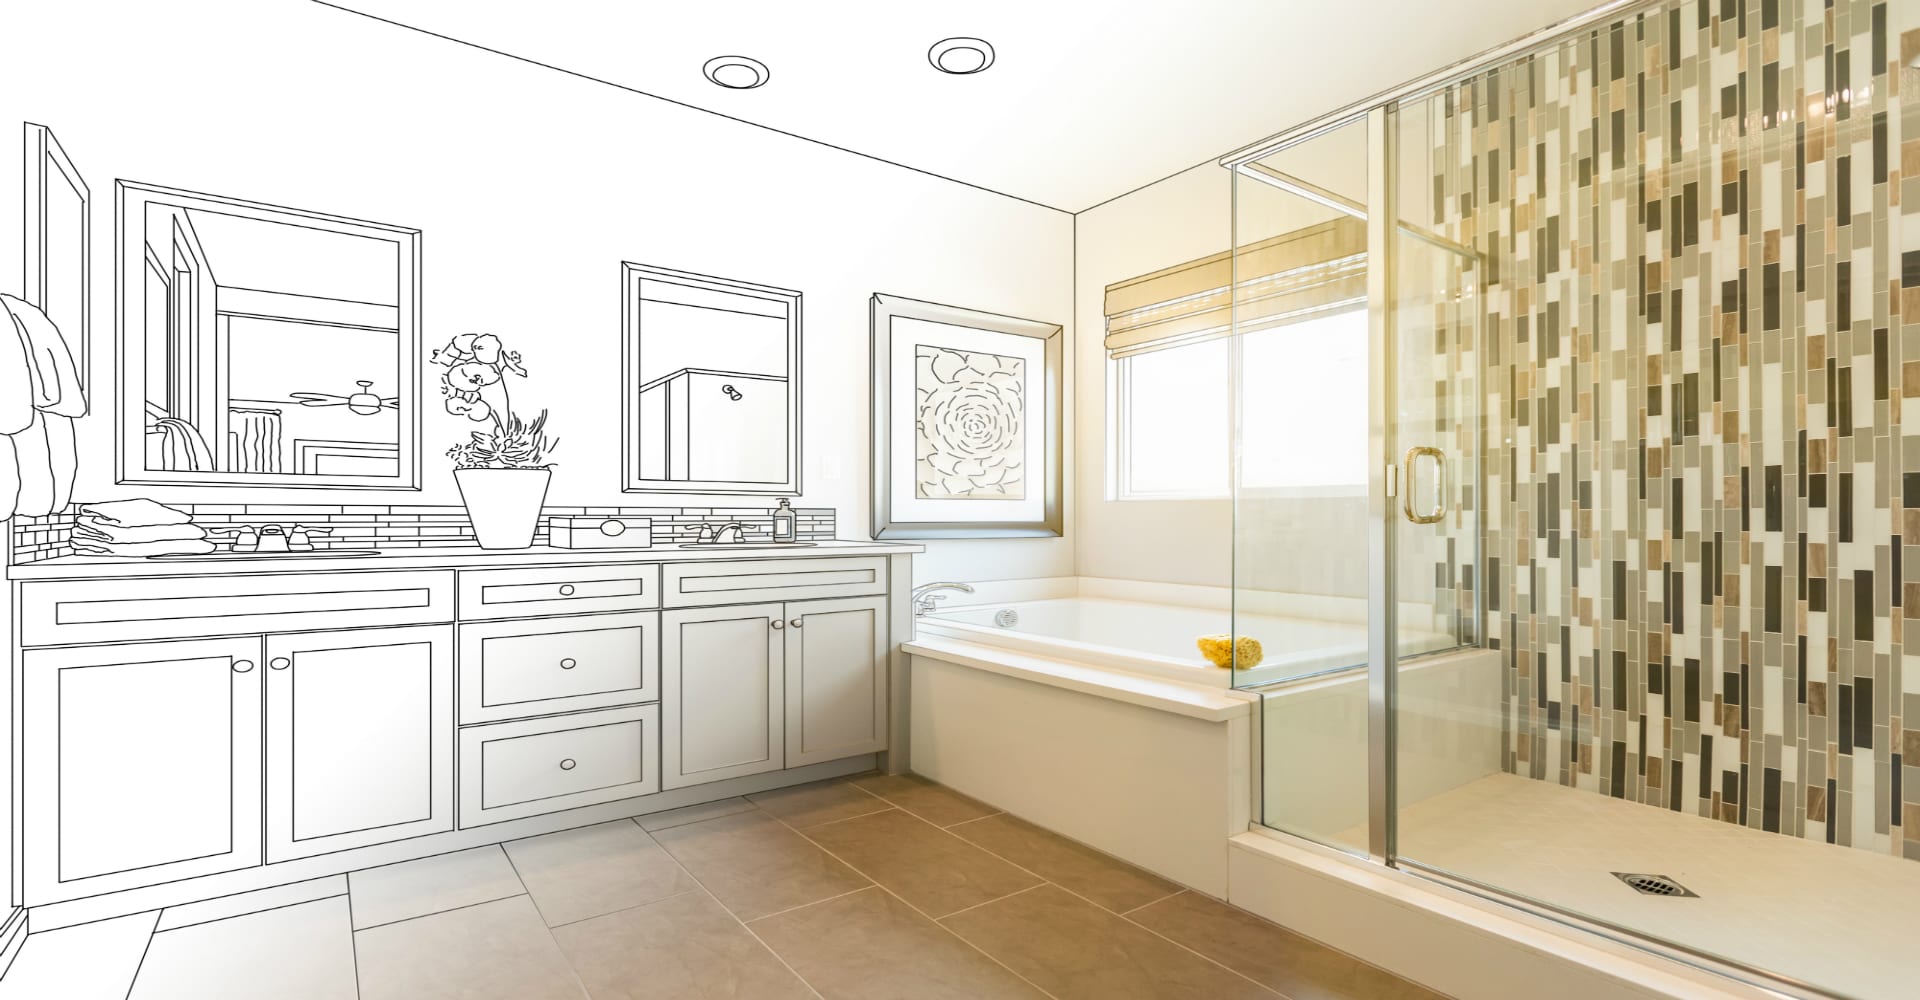 7 Important Improvements for Your Next Bathroom Remodel